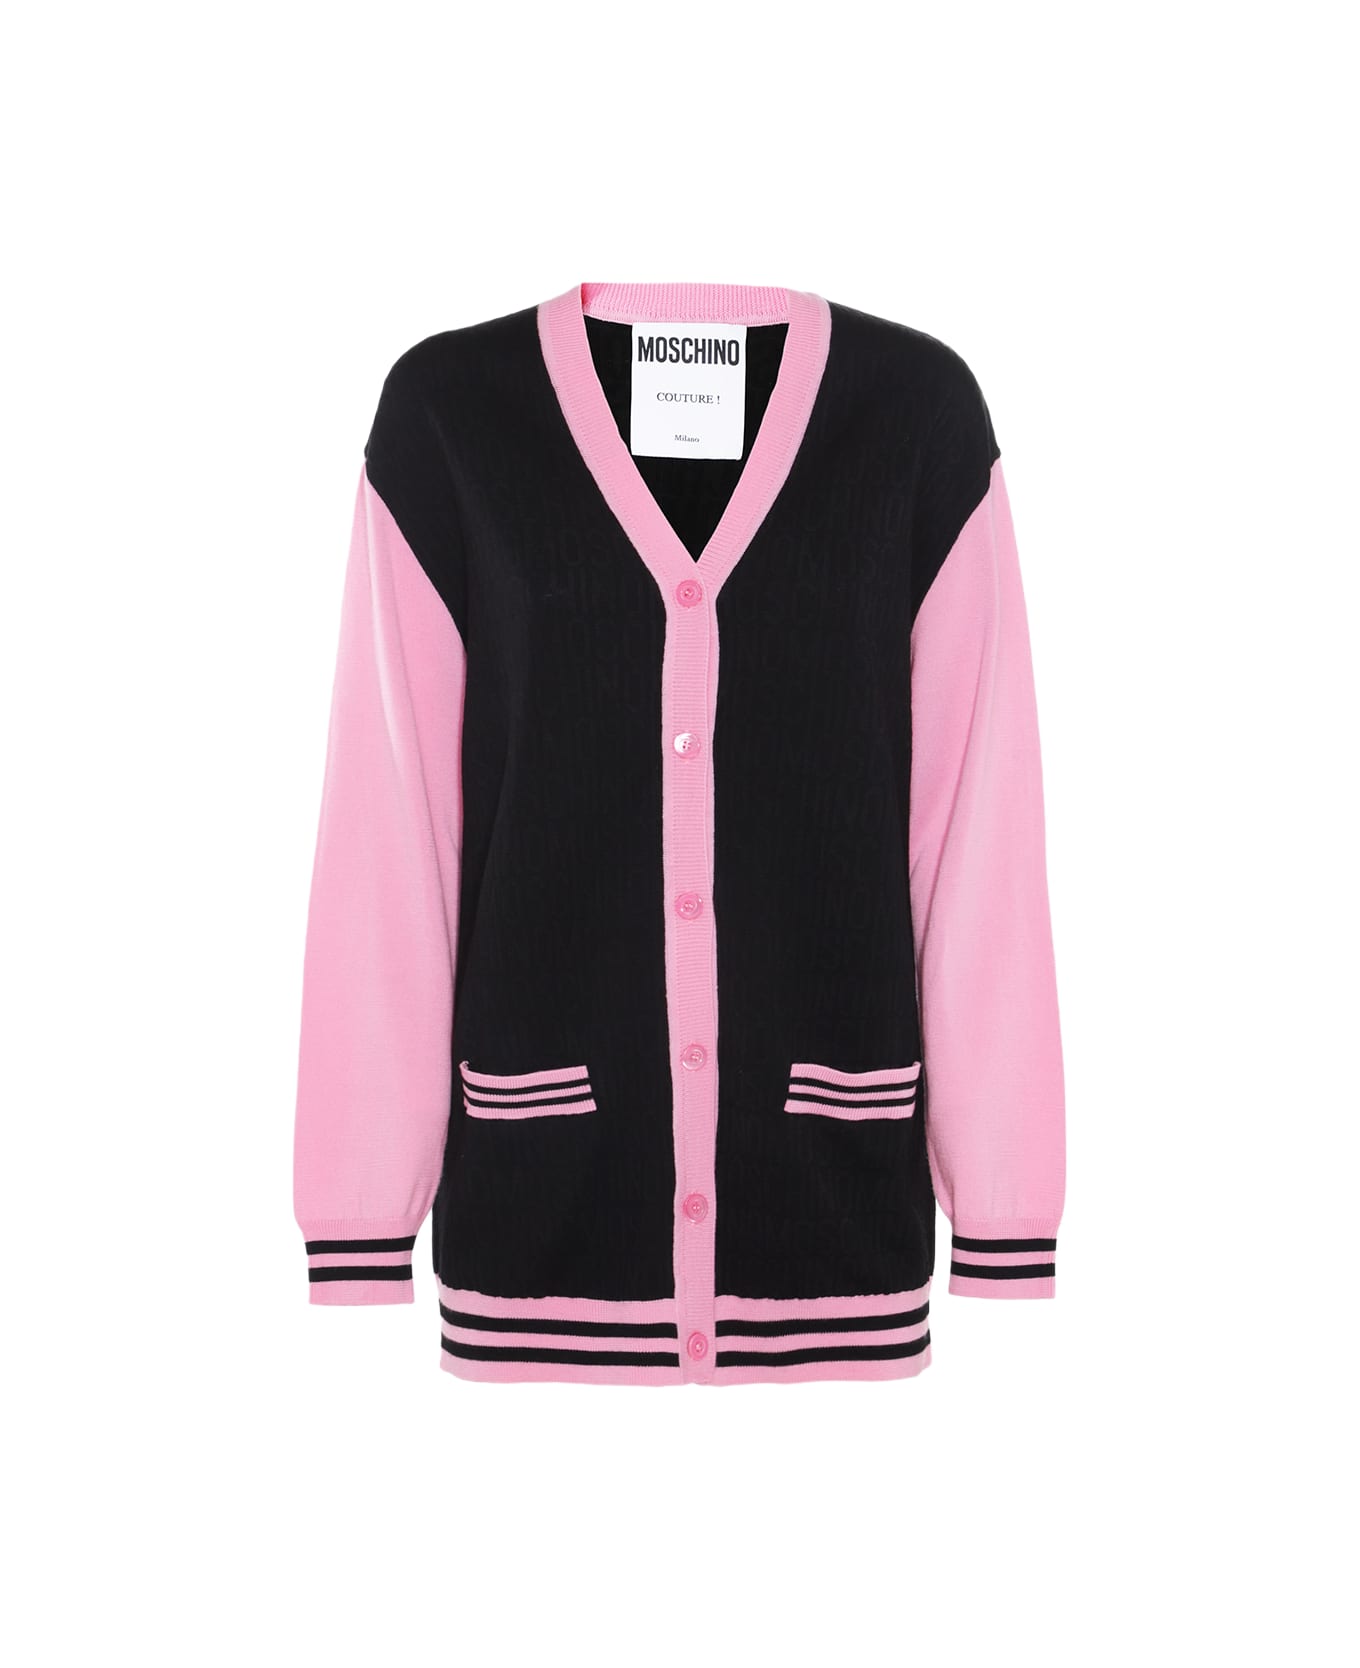 Moschino Black And Pink Wool Knitwear - Black カーディガン